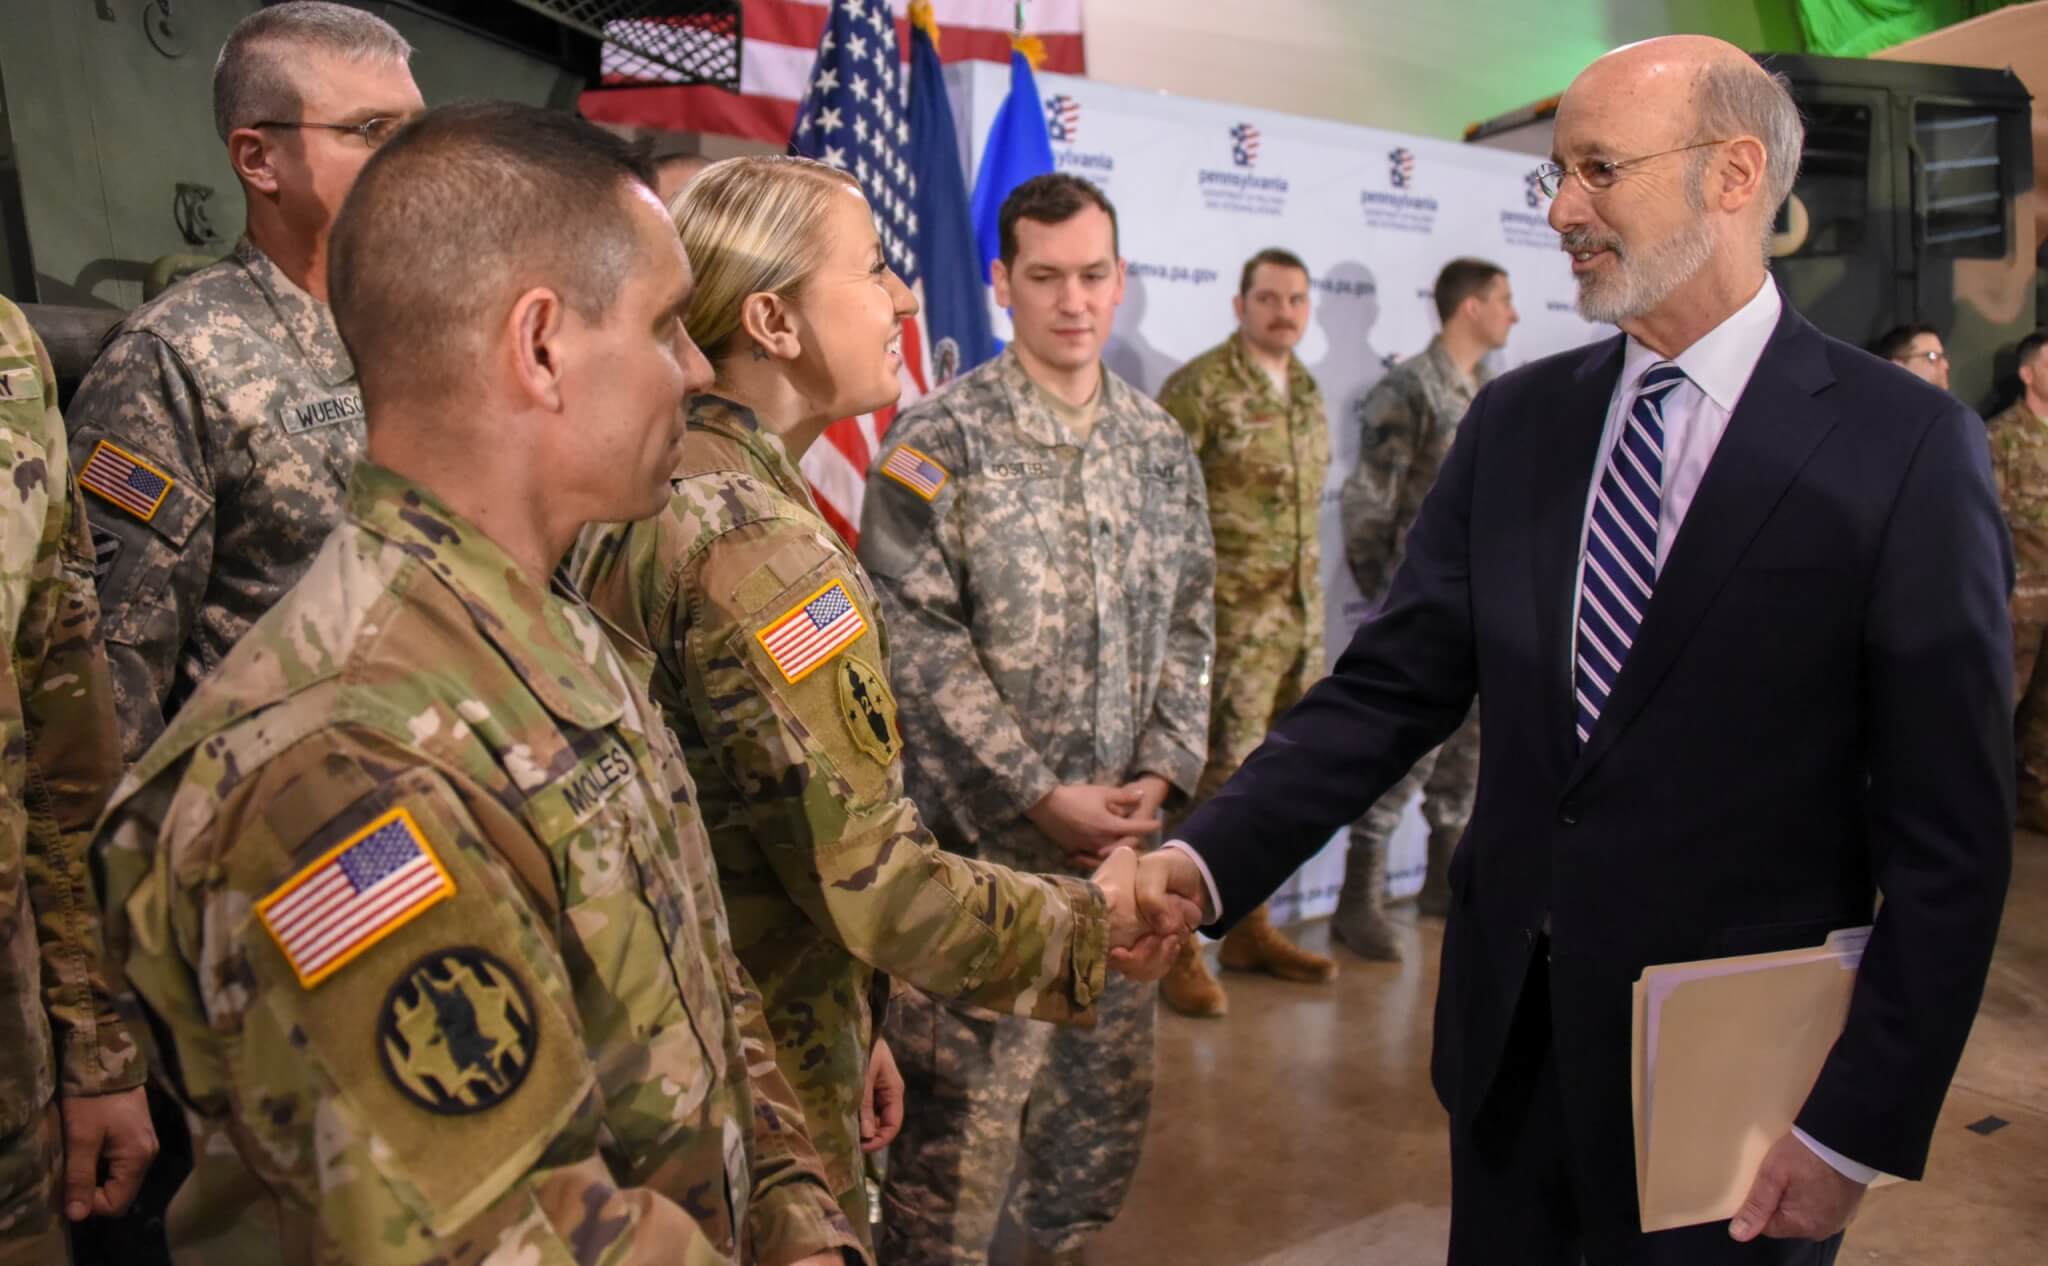 Pennsylvania Gov. Tom Wolf greets members of Pennsylvania National Guard during a press conference on the PA GI Bill. (Department of Military and Veterans Affairs photo by Tom Cherry/Released)